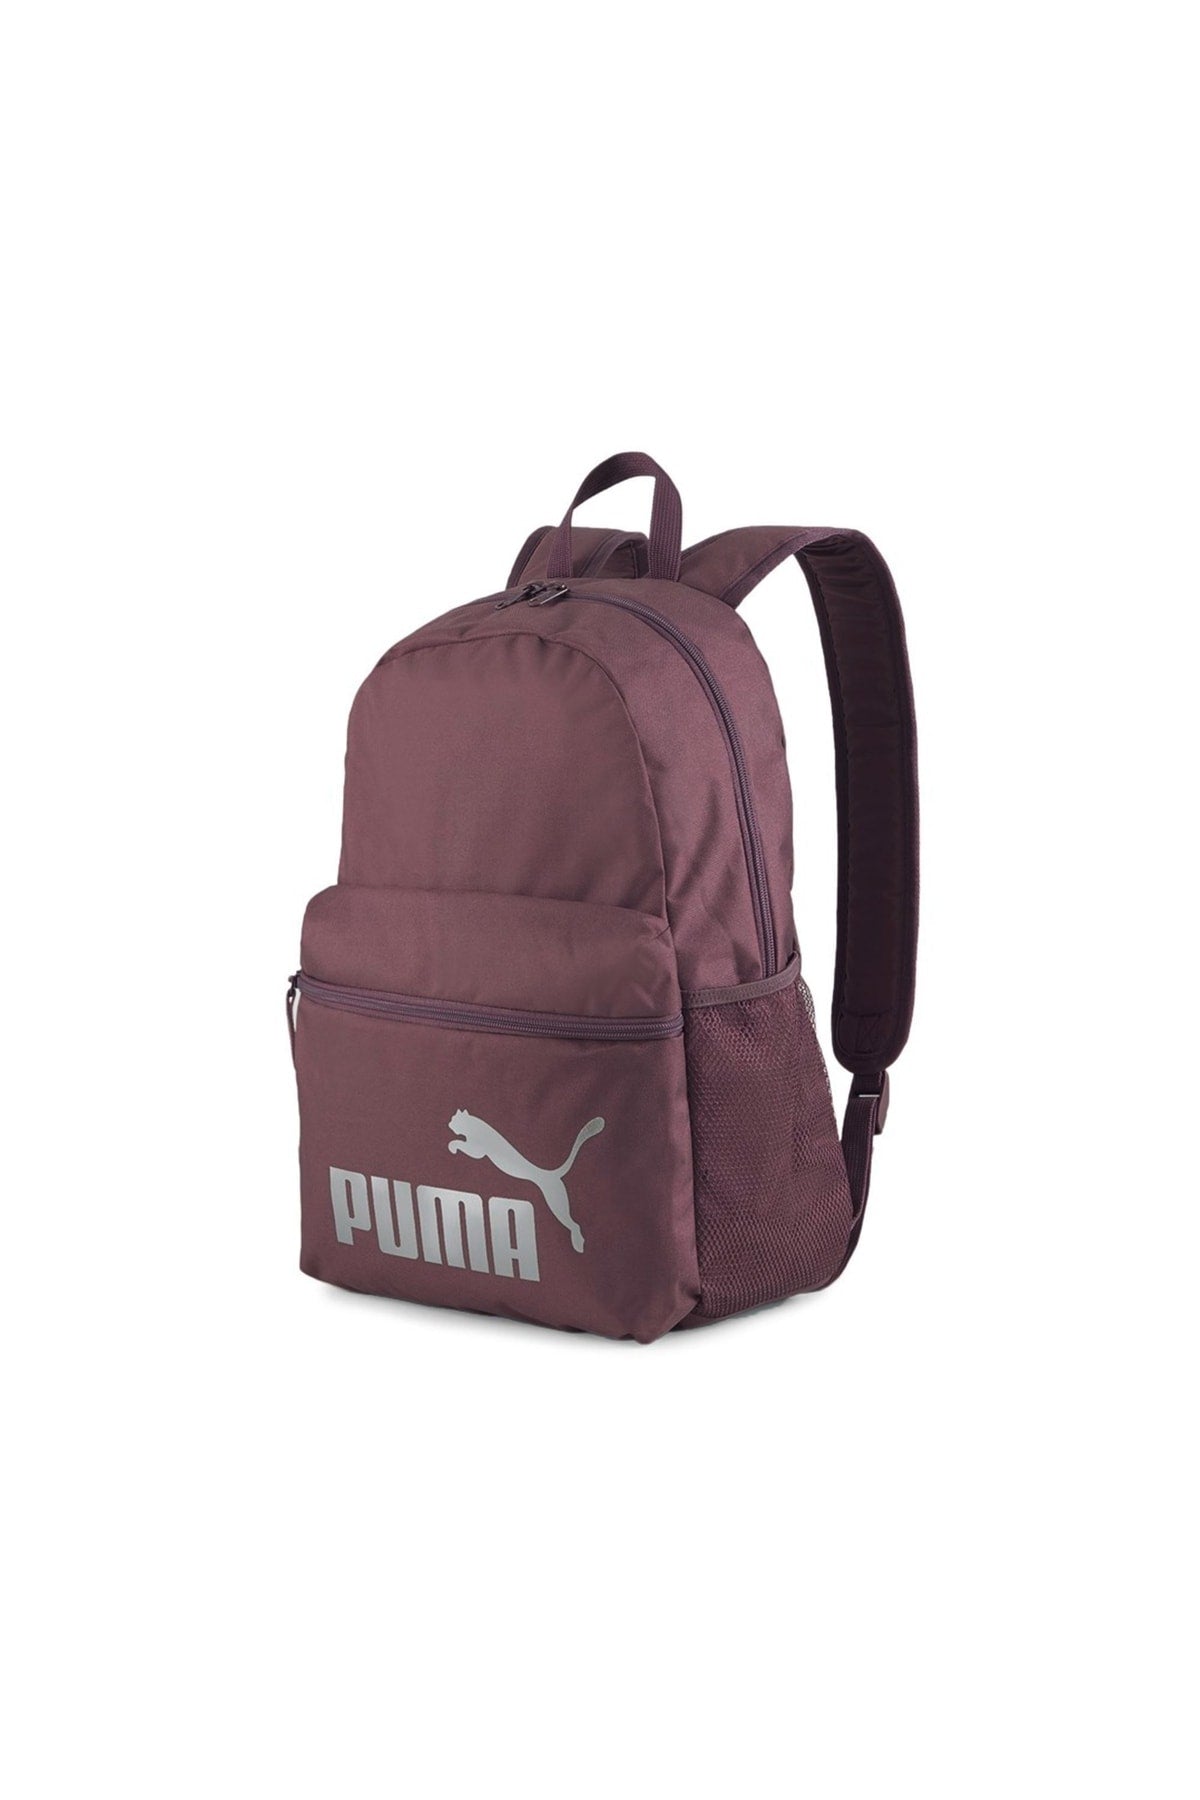 Phase Backpack Daily Backpack 7548741 Pink